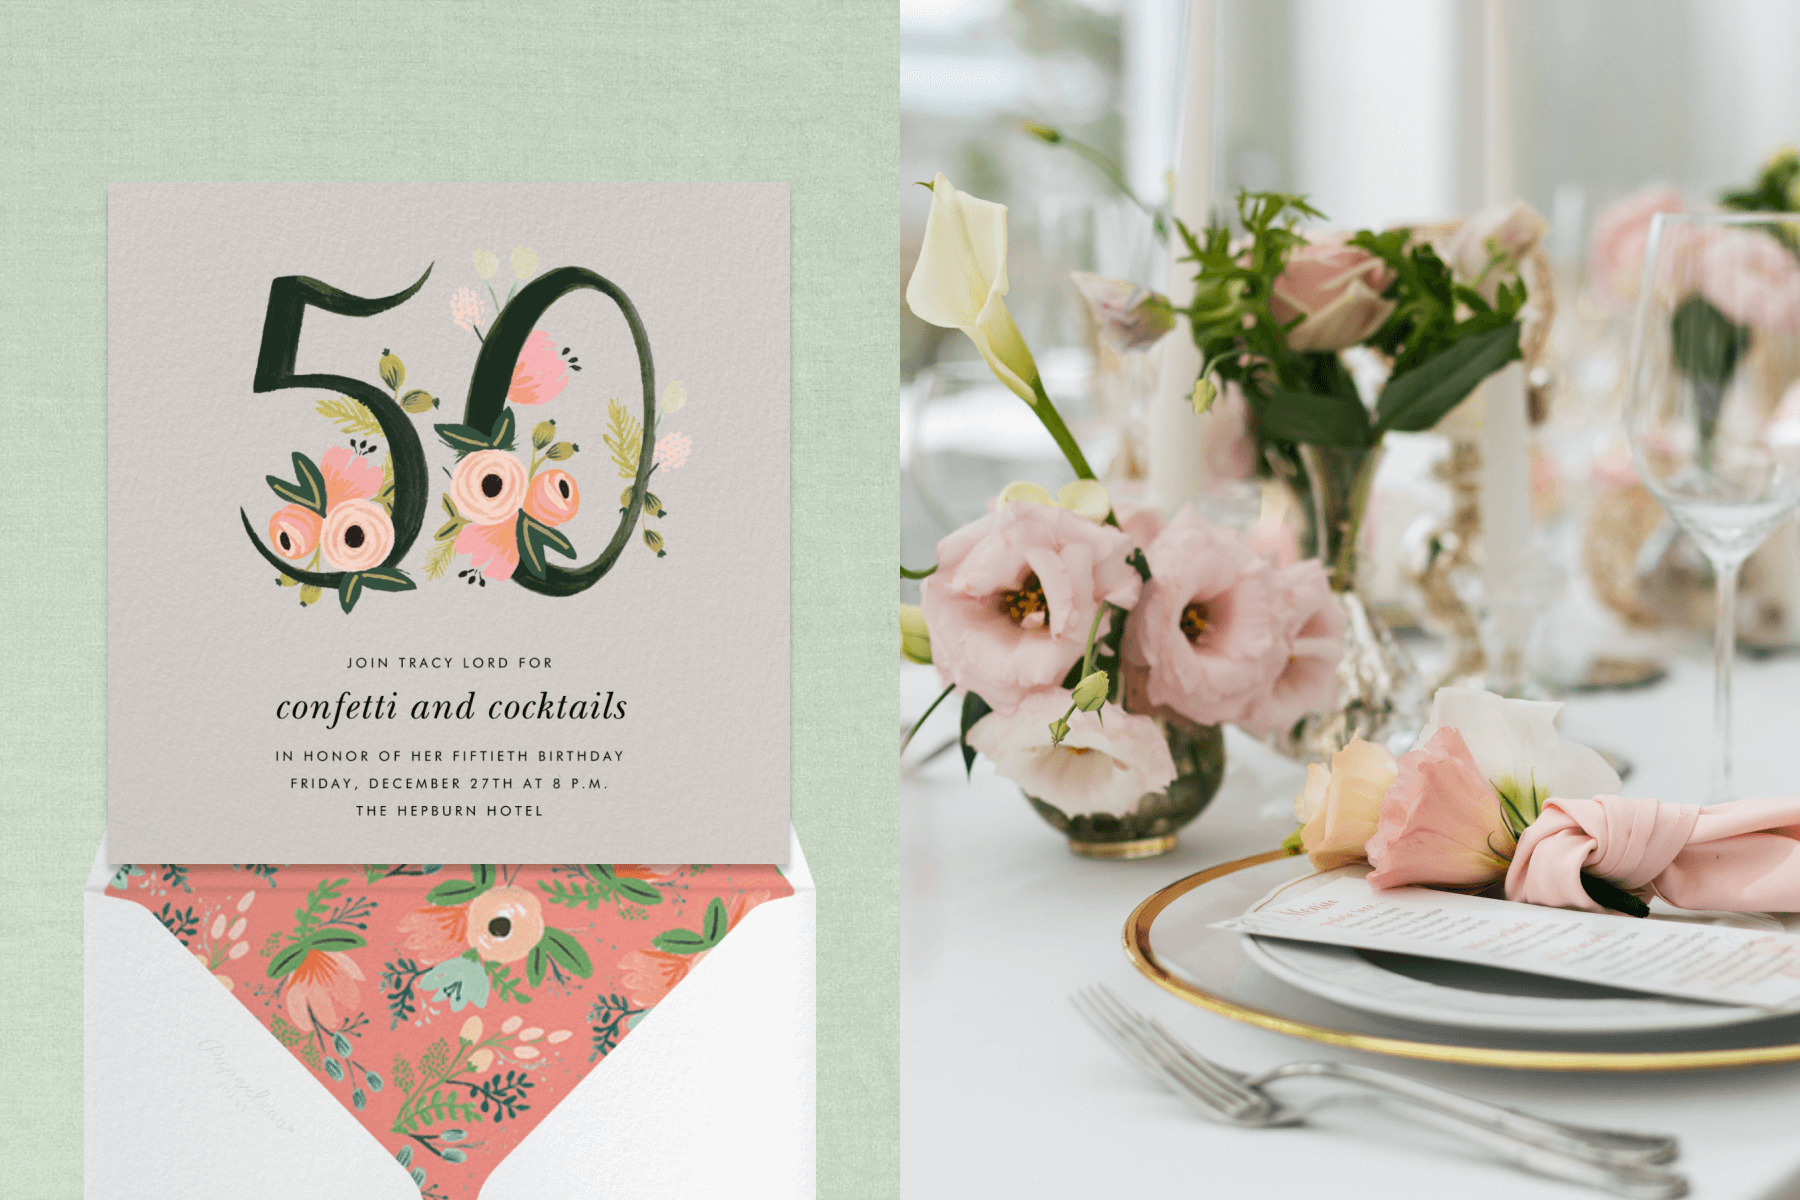 A floral-themed 50th birthday invitation; a table set with a white tablecloth, a gold-rimmed plate, and pink and white flower centerpieces.